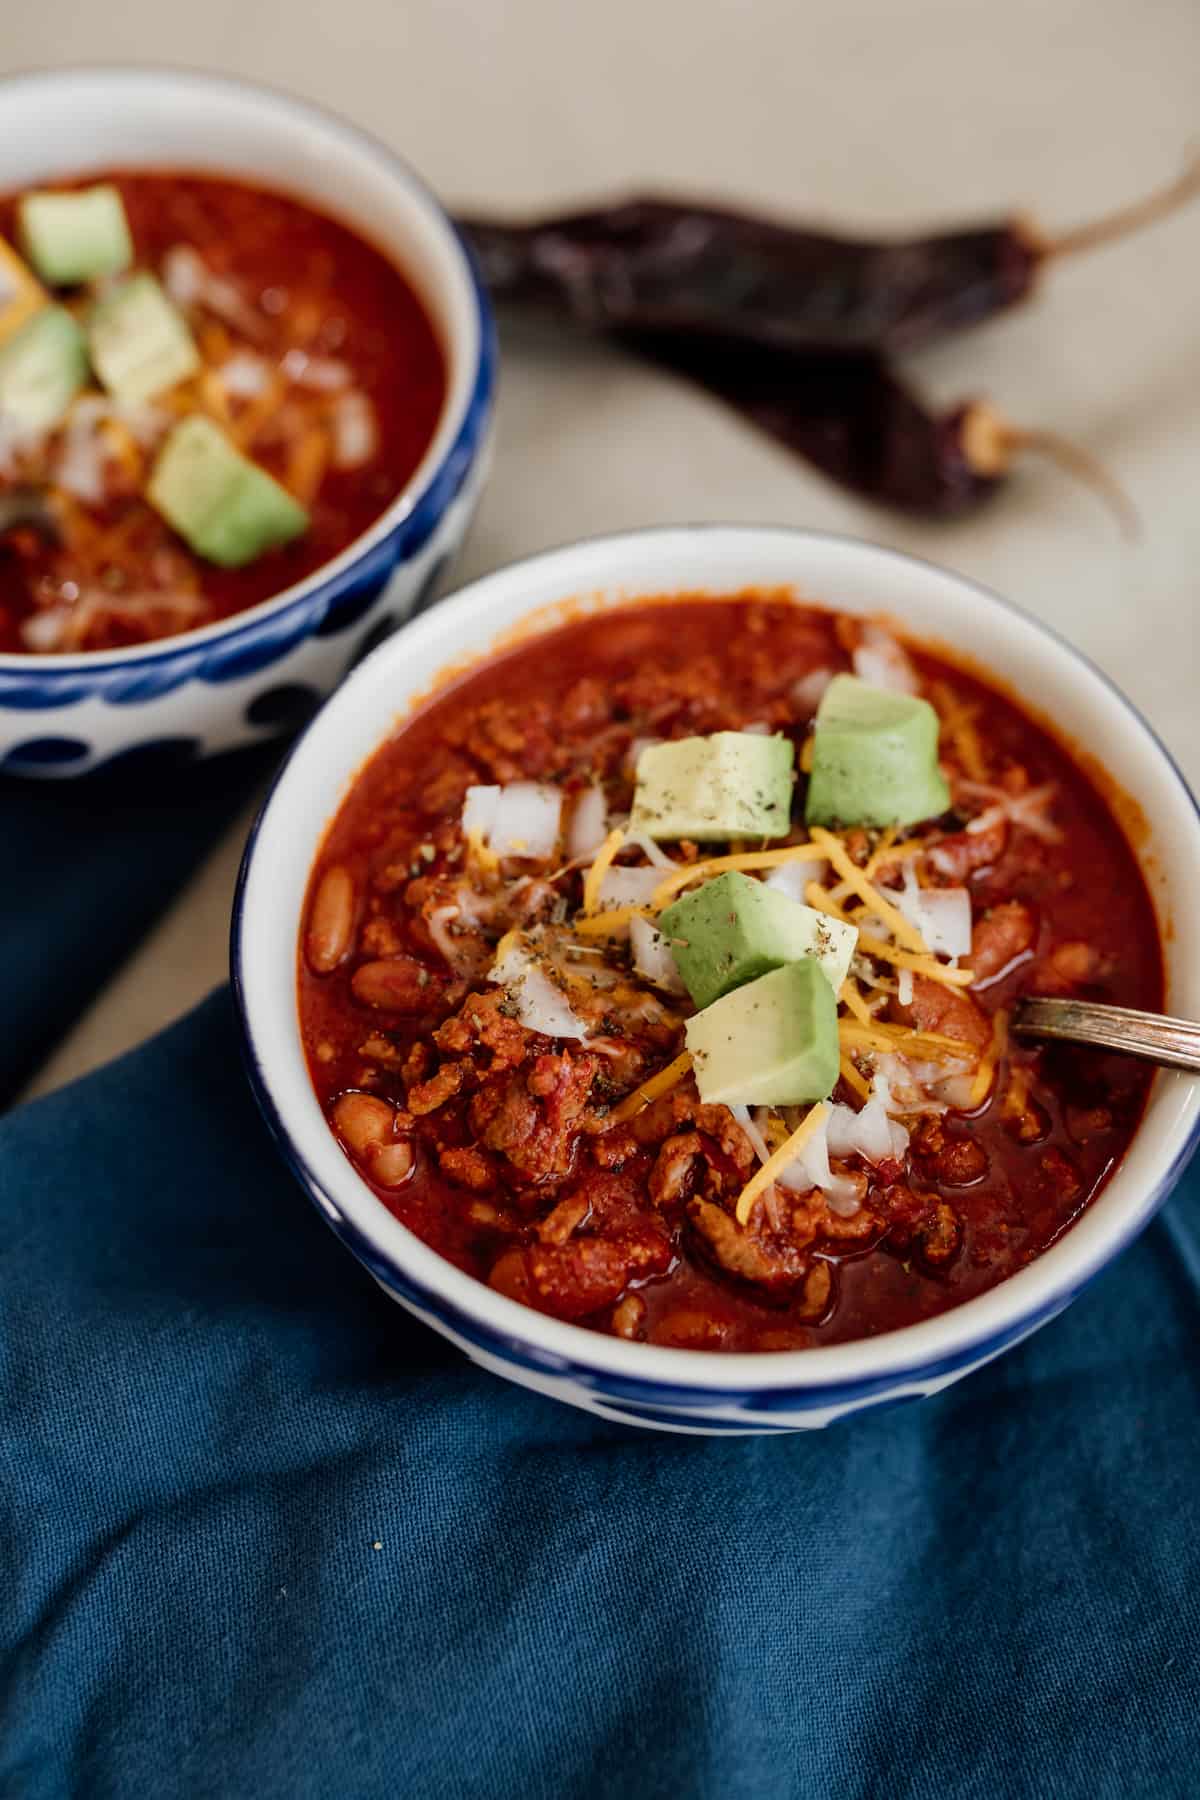 Mexican chili con carne topped with onions, cheese and avocados in blue and white bowls.